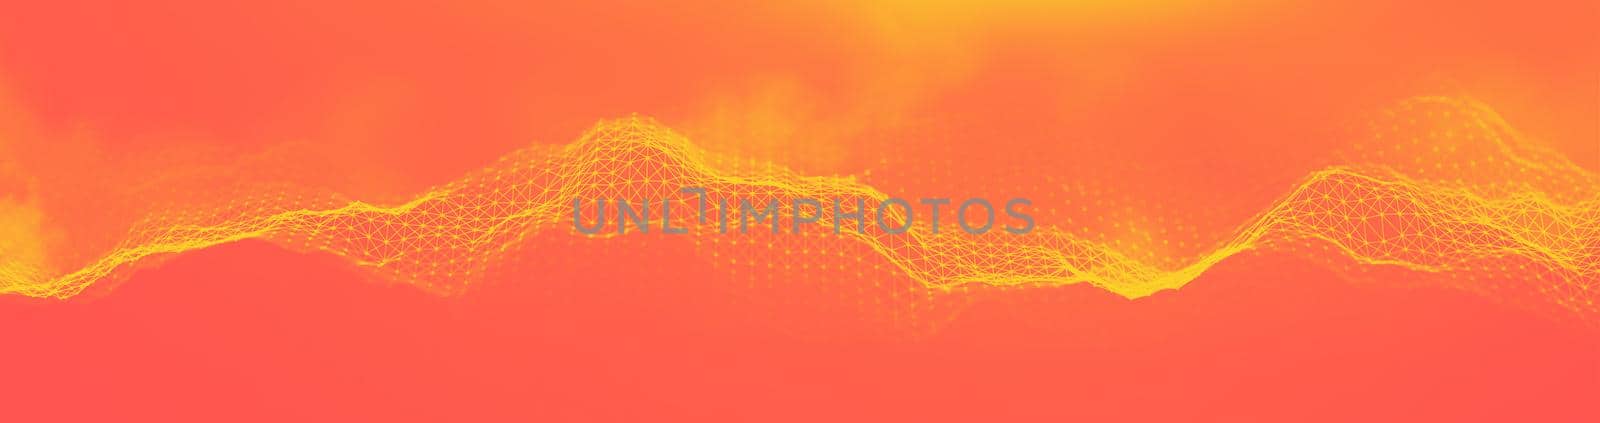 Retro orange abstract background. Colorful geometric cover design. 3d rendering. by DmytroRazinkov